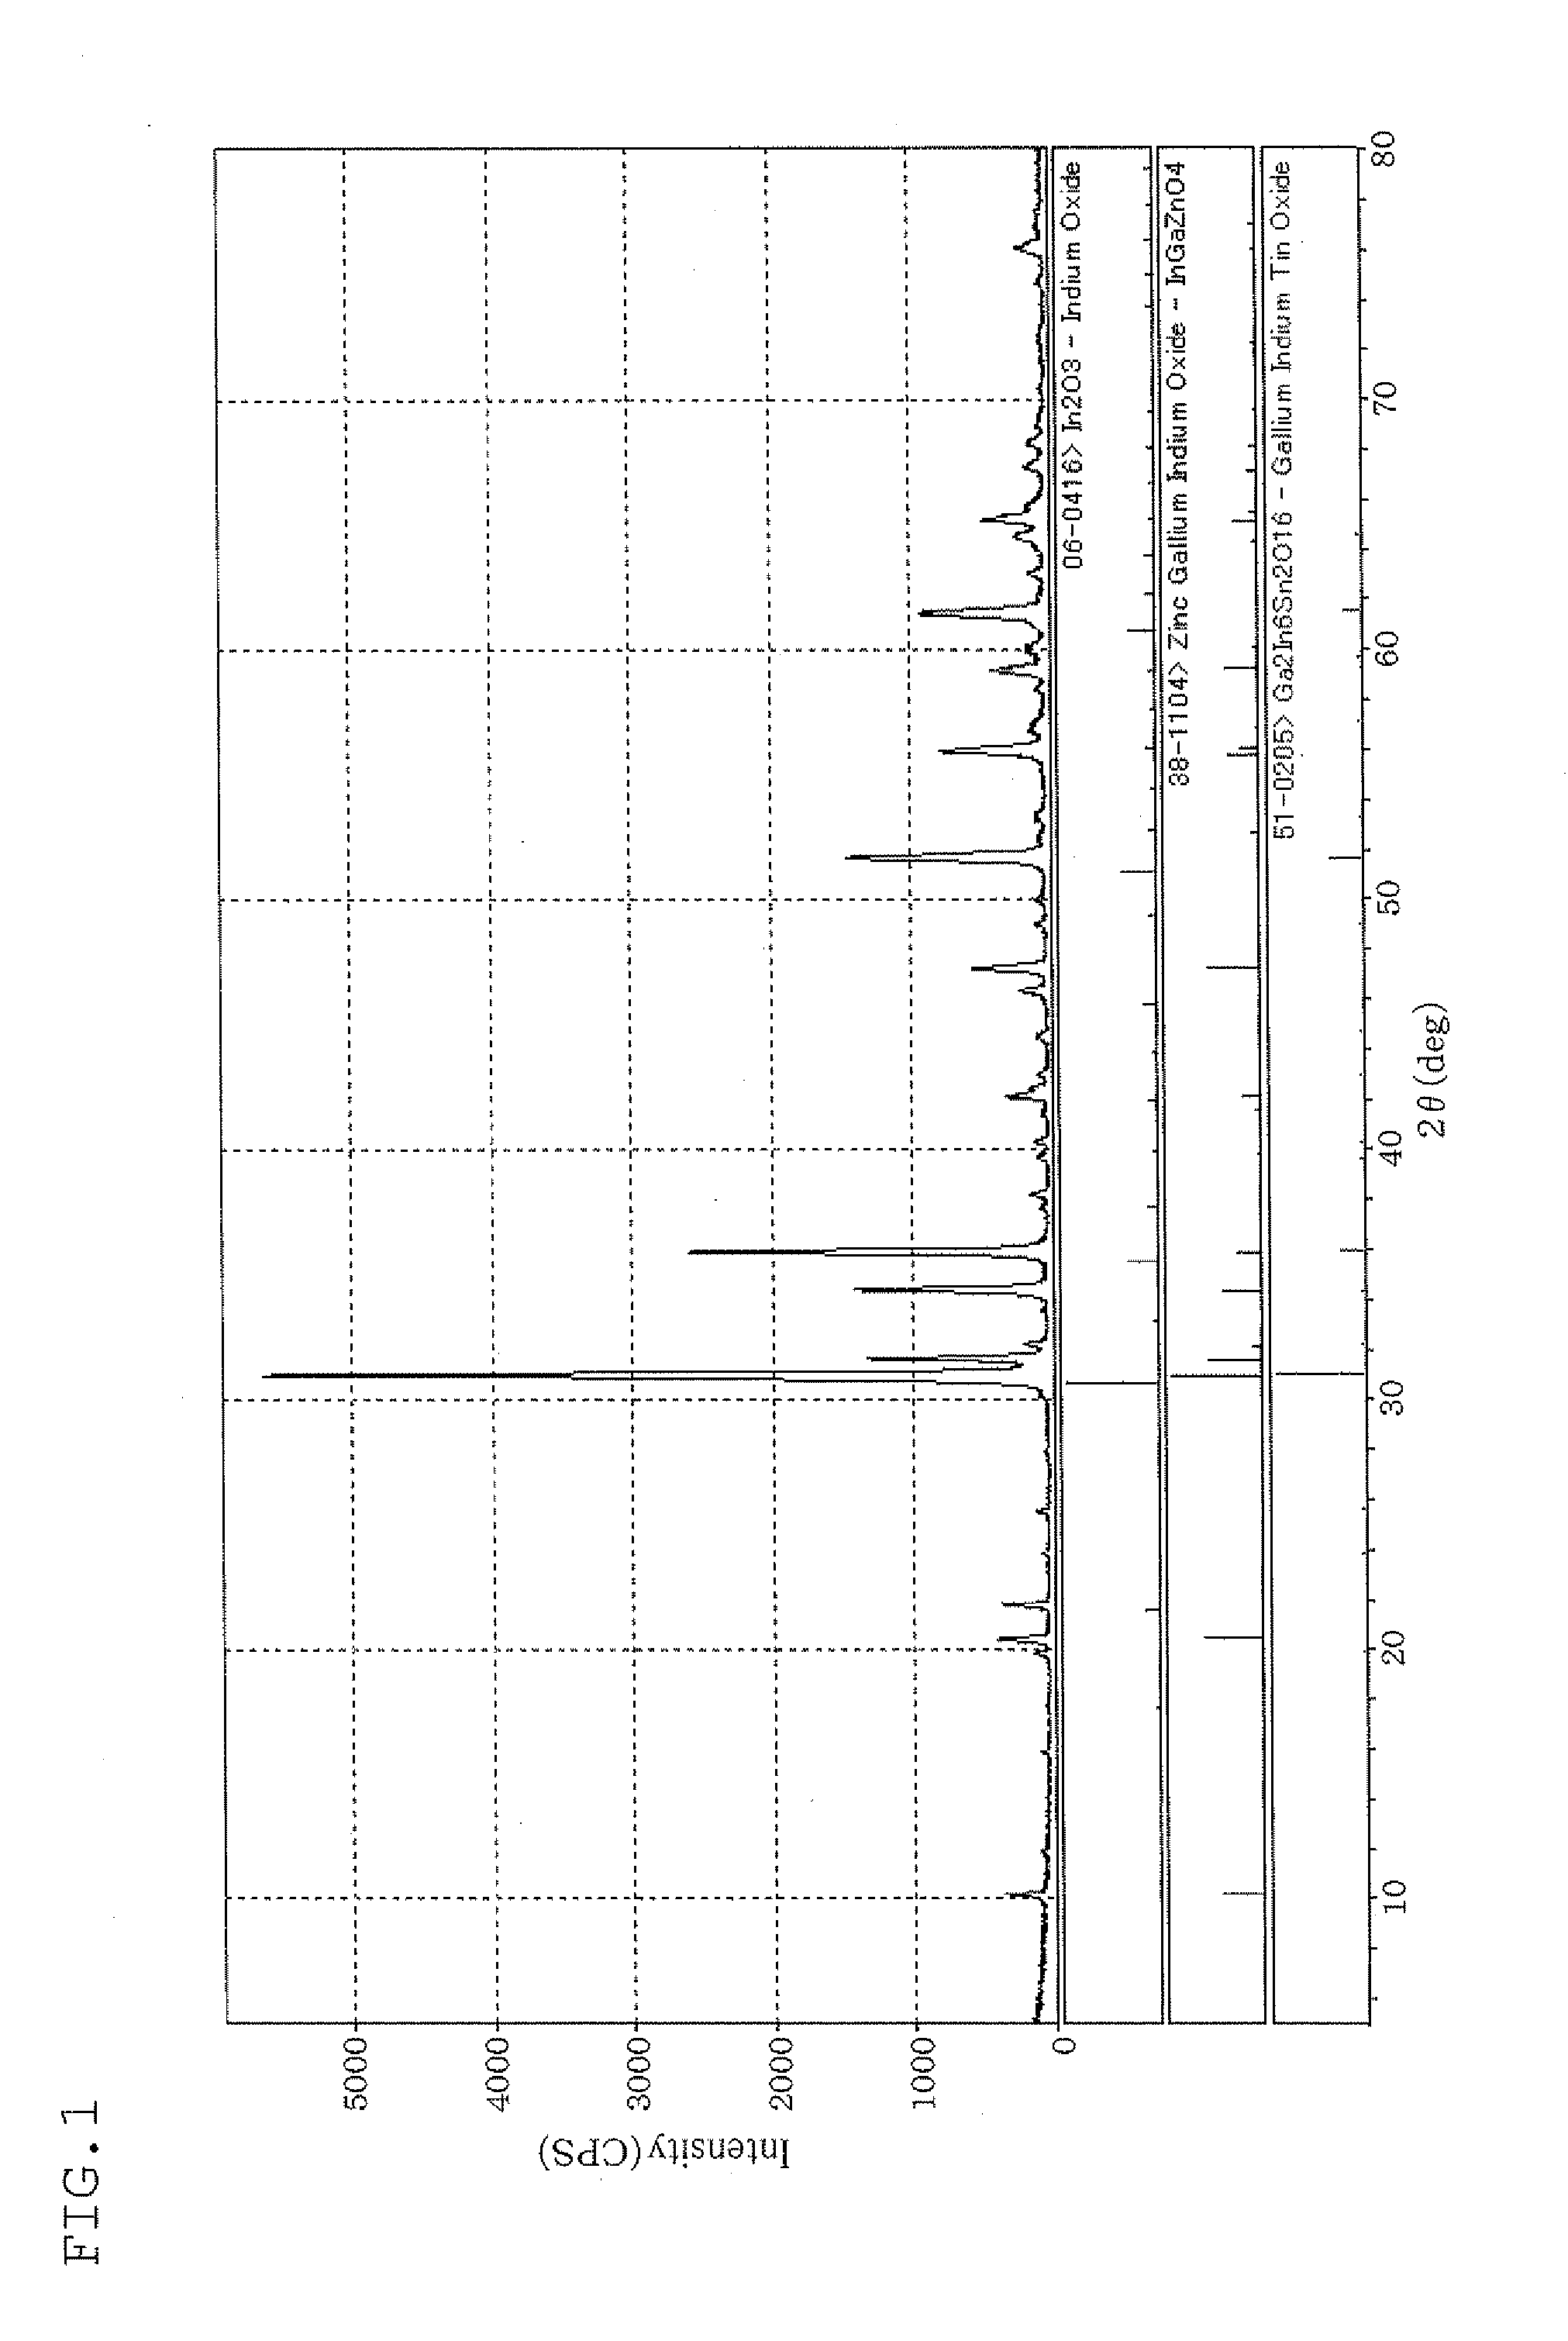 In-ga-zn-sn type oxide sinter and target for physical film deposition